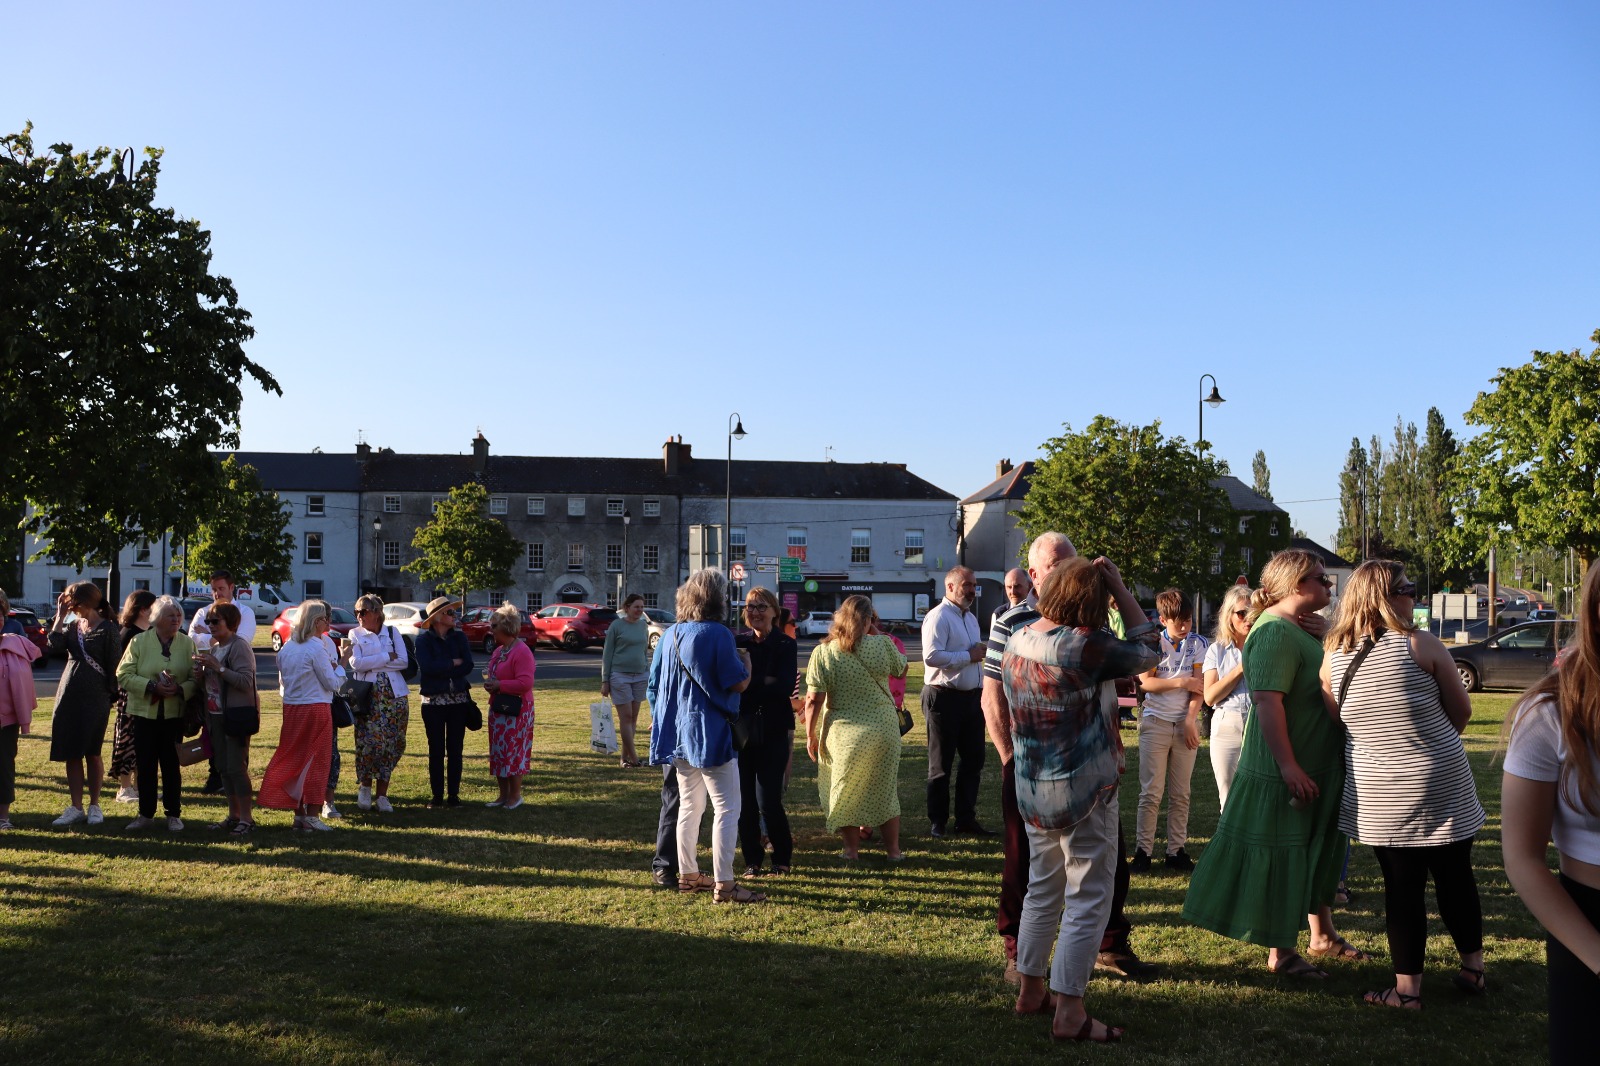 the crowd enjoying the evening sun and style at the Fifty-Seven event